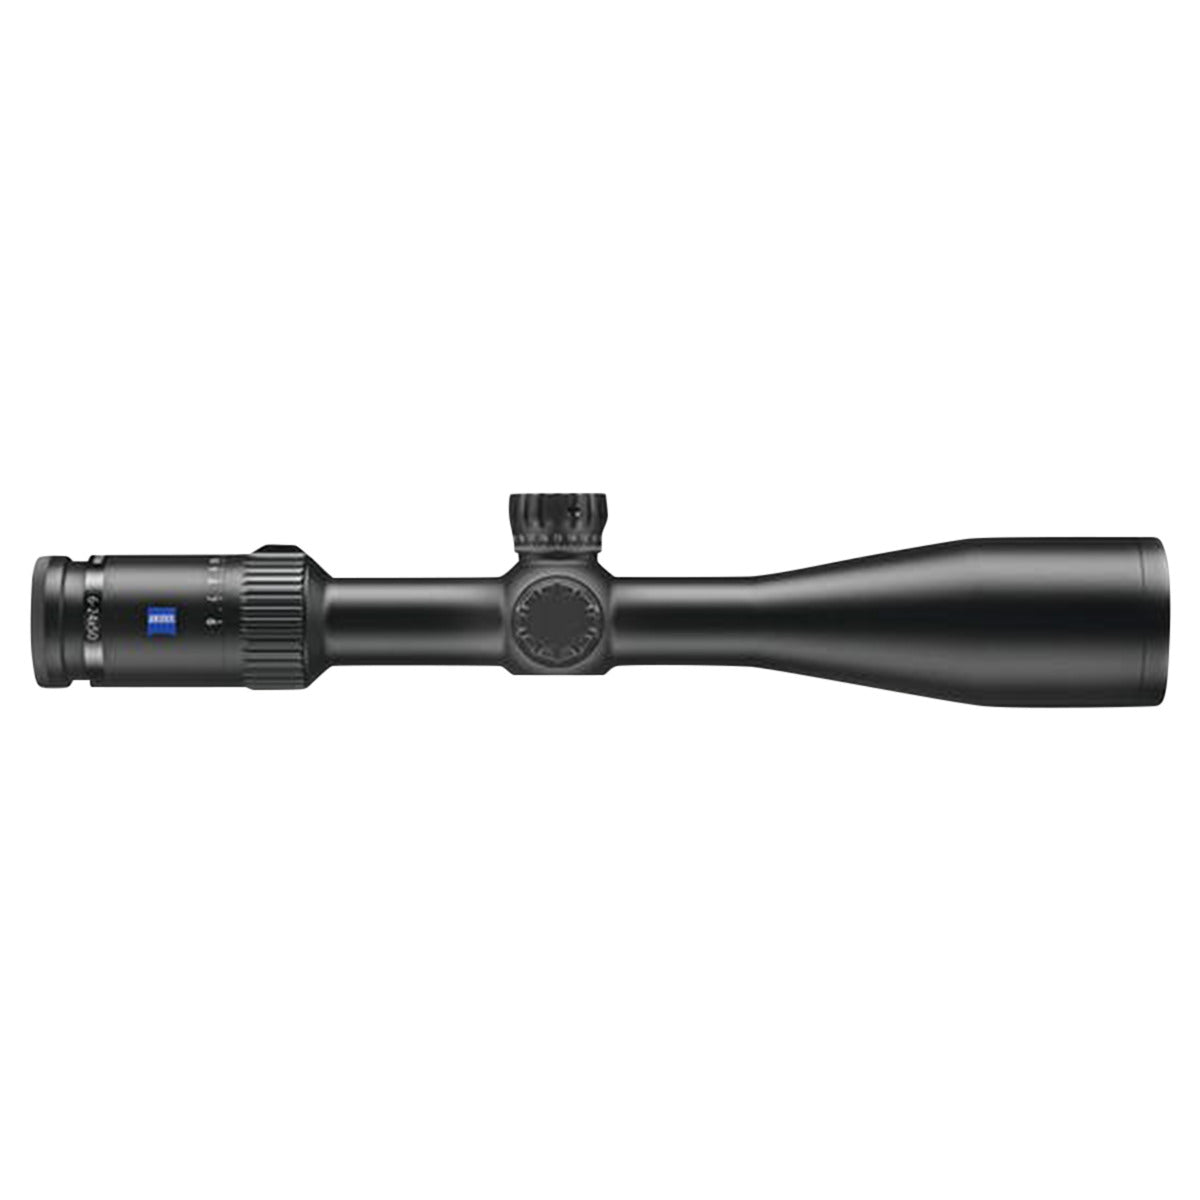 Zeiss Conquest V4 6-24x50 ZMOAi T-20 Illuminated #65 Reticle Riflescope in Zeiss Conquest V4 6-24x50 ZMOAi-T #65 Riflescope by Zeiss | Optics - goHUNT Shop by GOHUNT | Zeiss - GOHUNT Shop